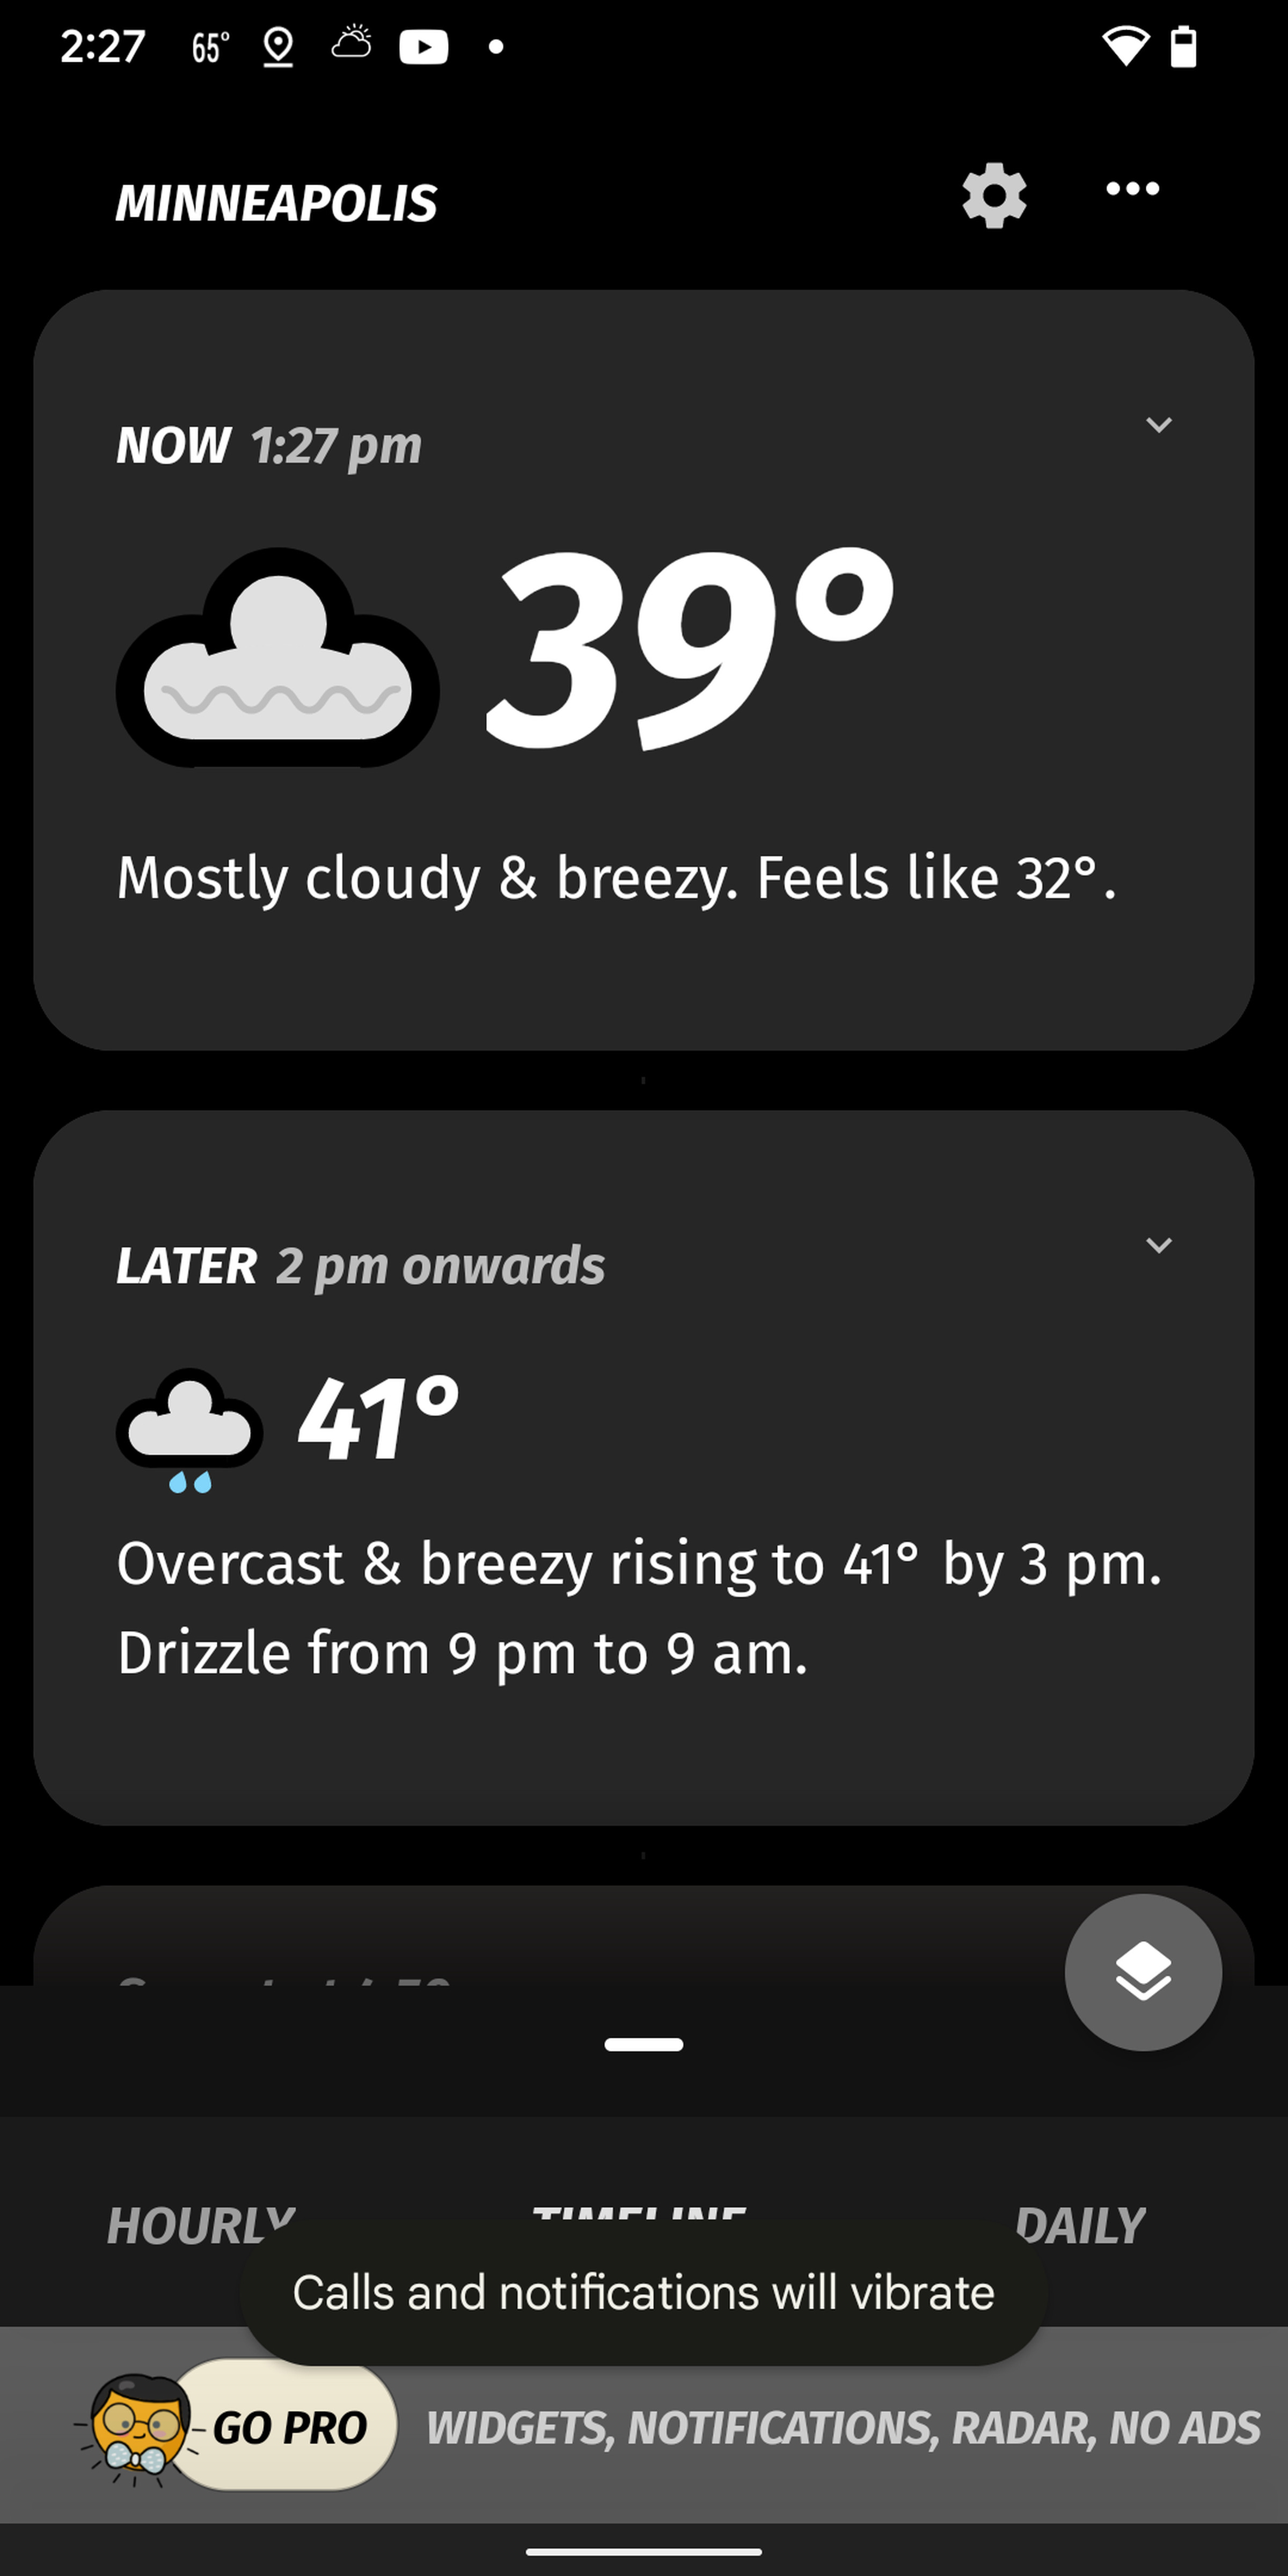 Appy Weather has a simple, straightforward interface.